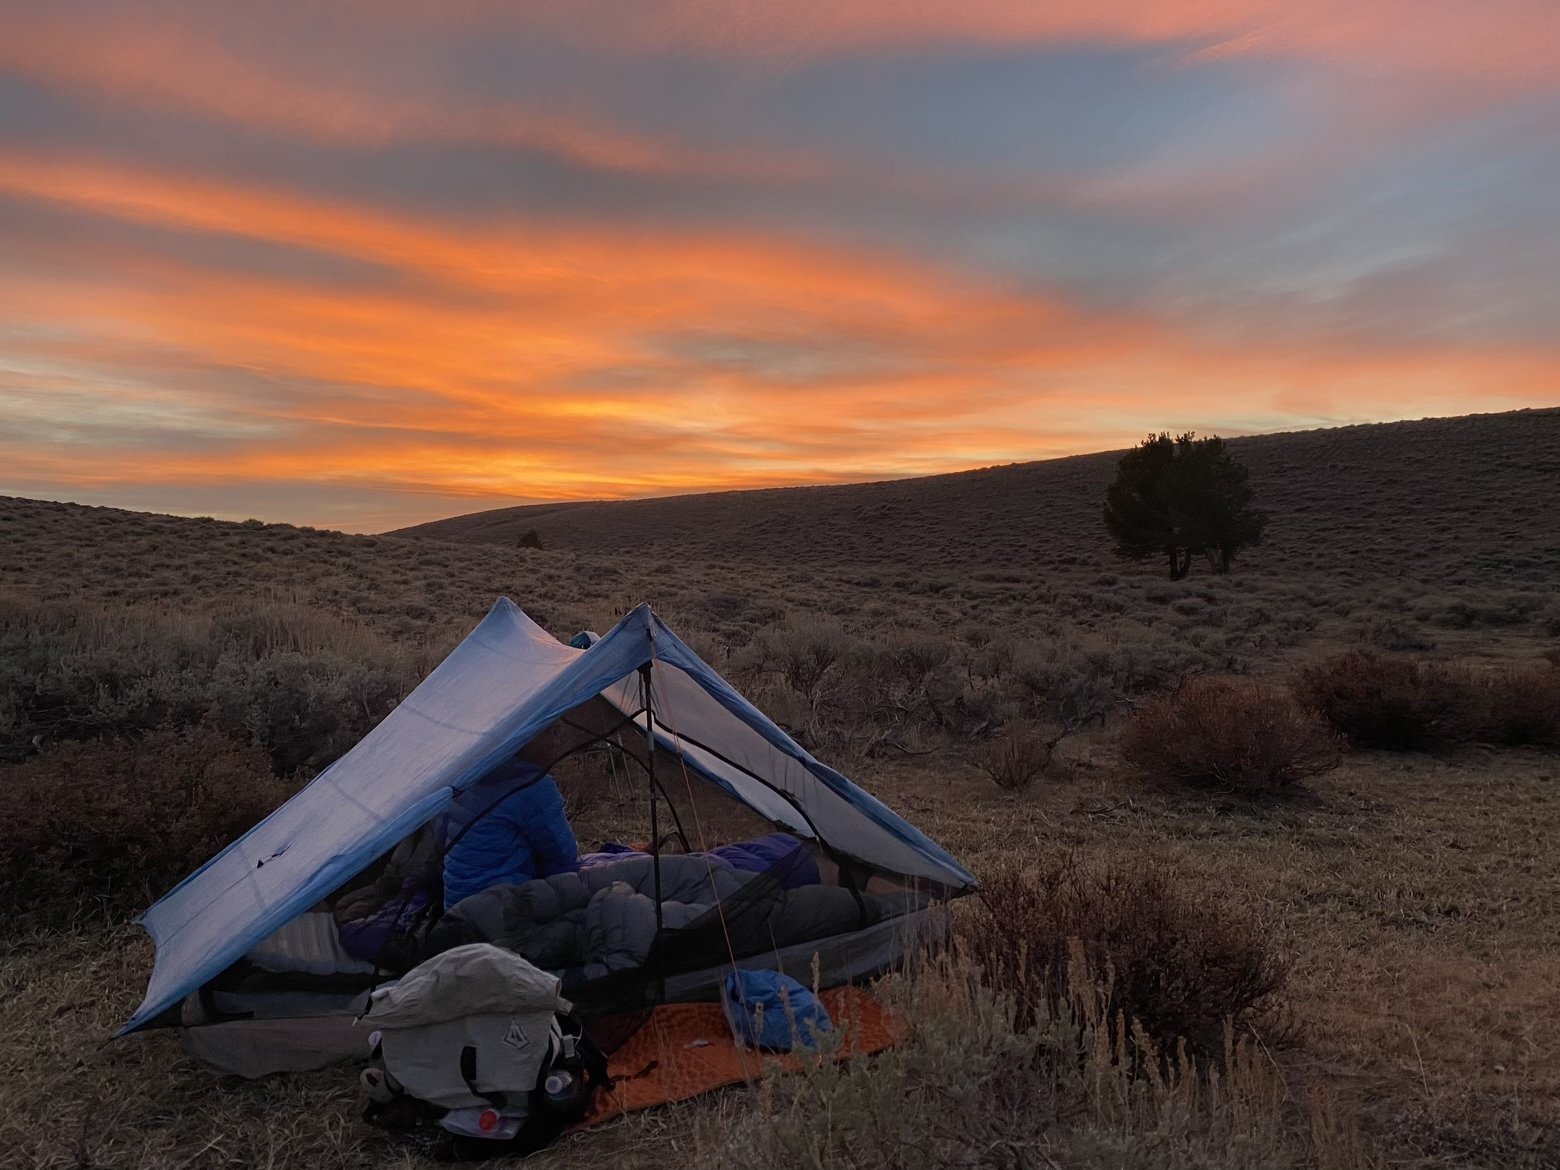 Sunrise in the Great Divide Basin